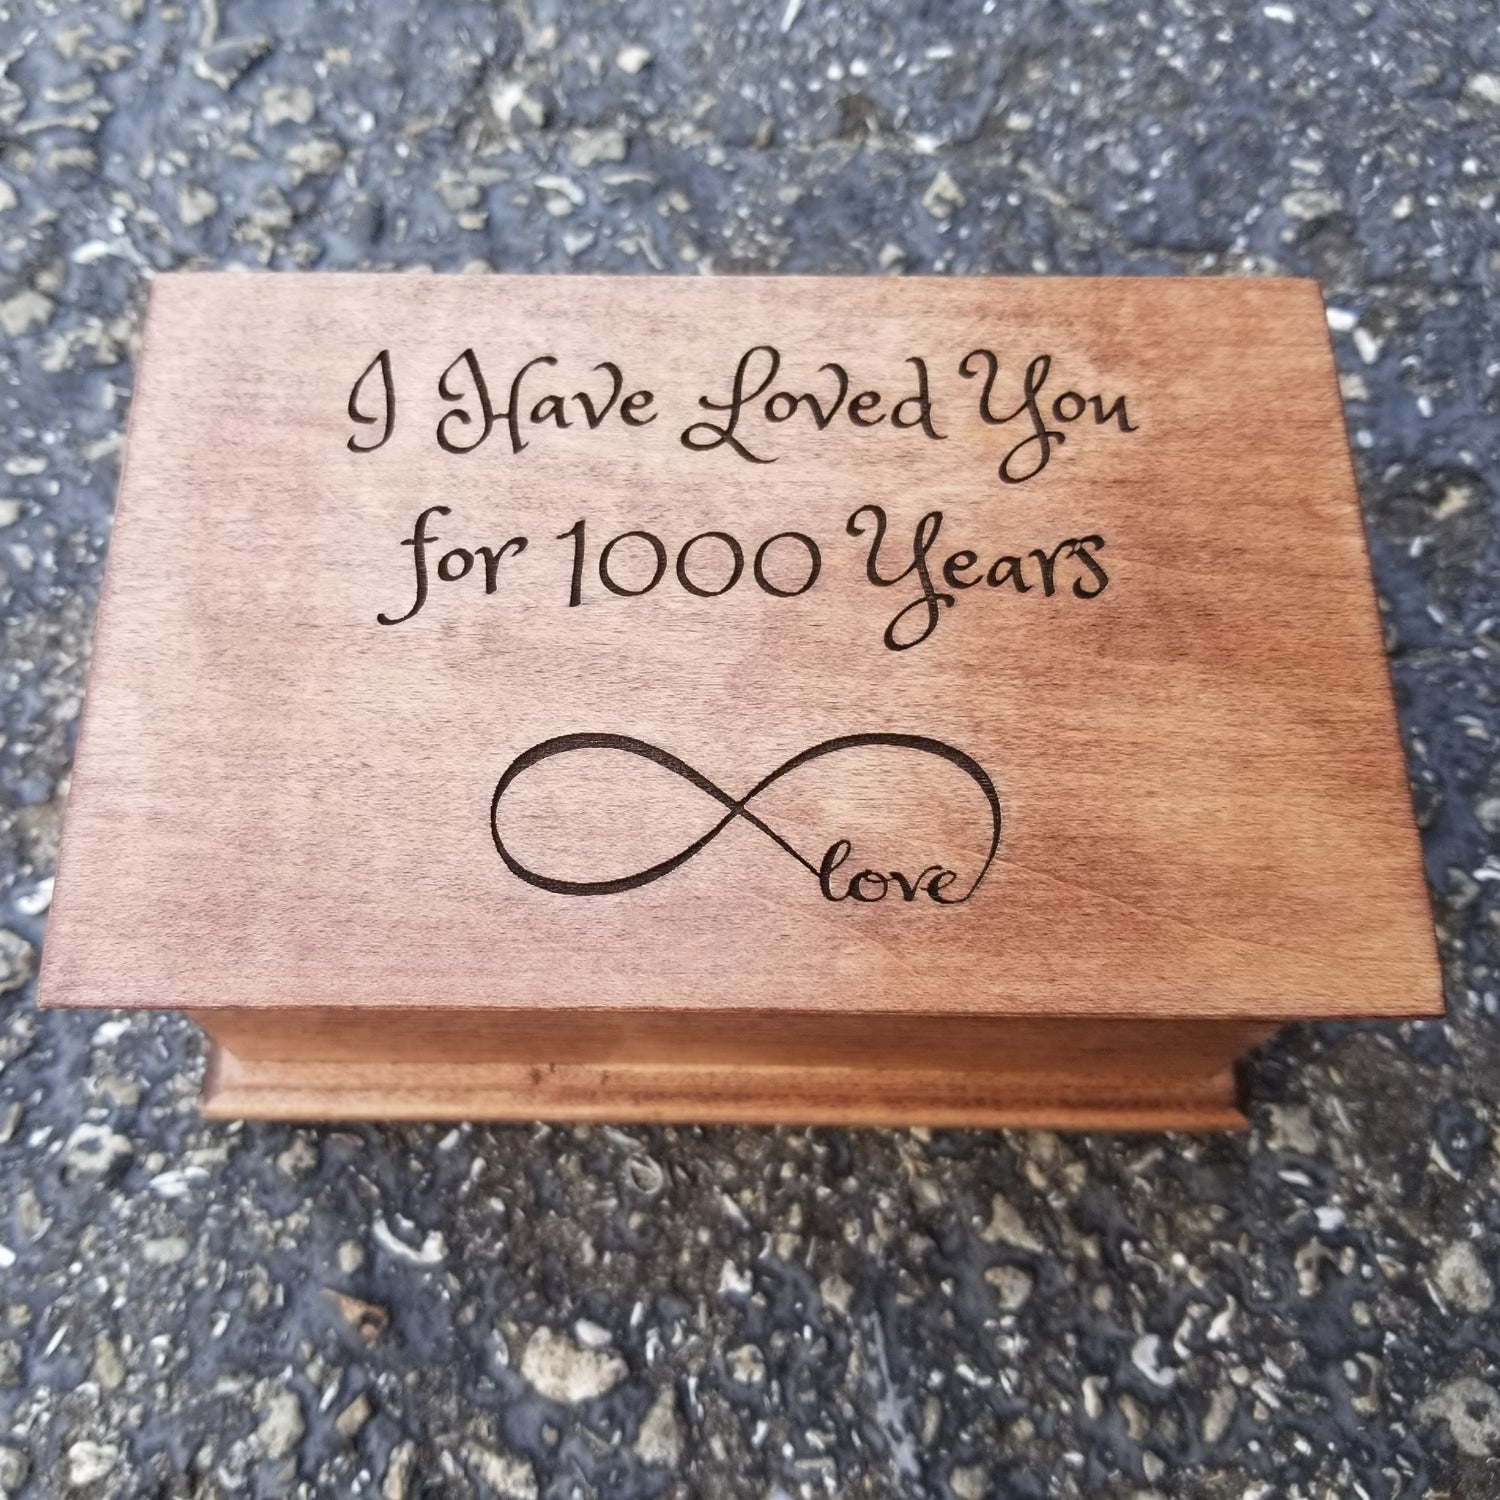 Personalized Jewelry Box with custom engraving and song choice, this one comes with an infinity love symbol